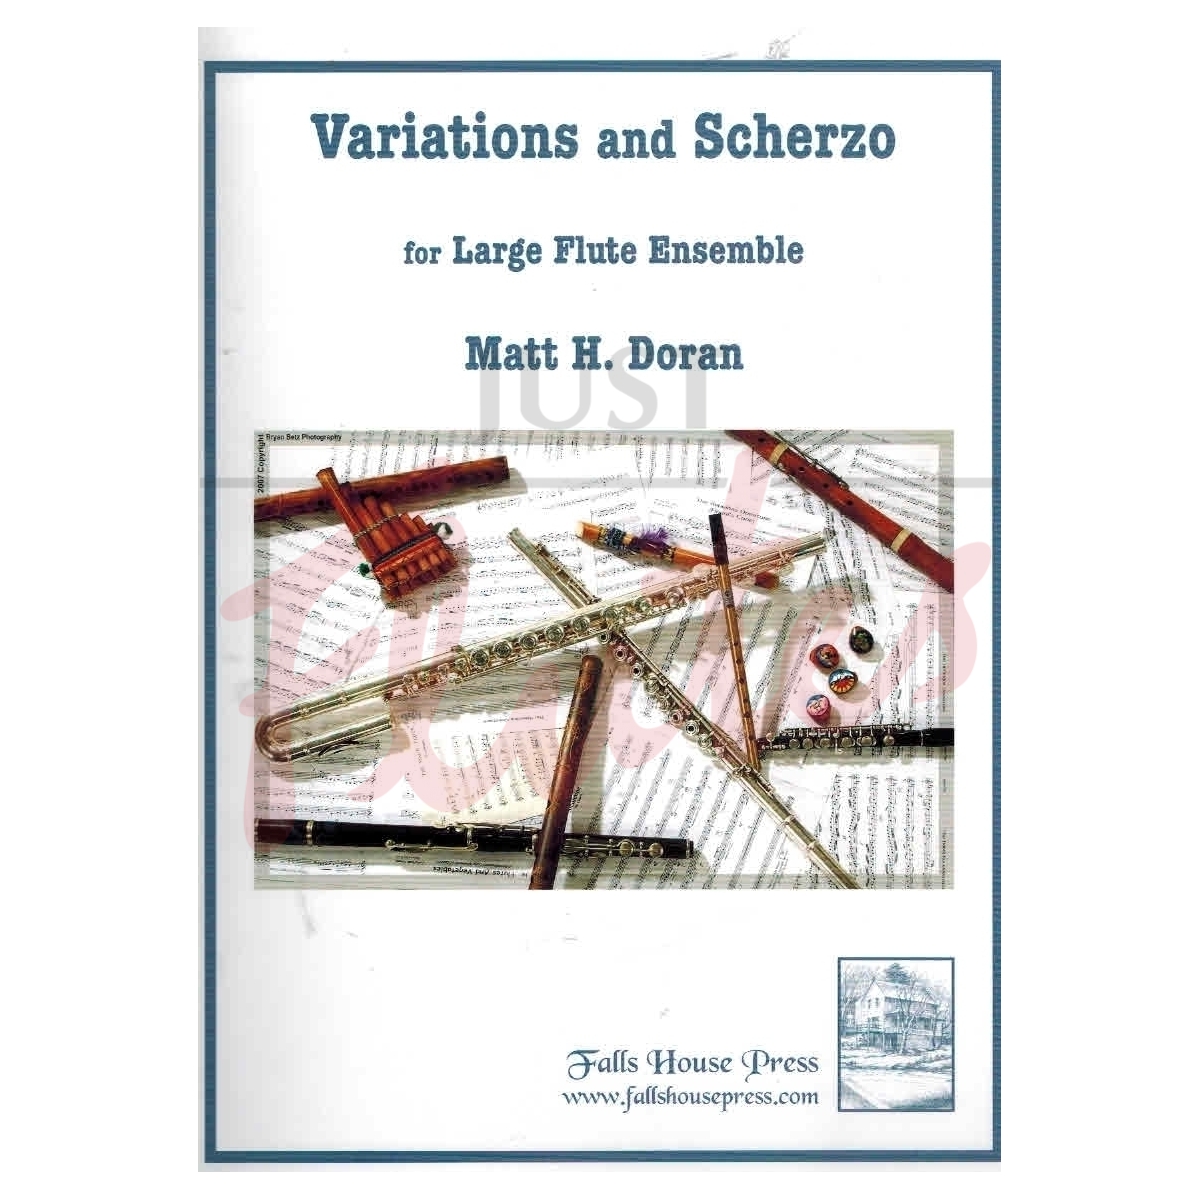 Variations and Scherzo for Large Flute Ensemble